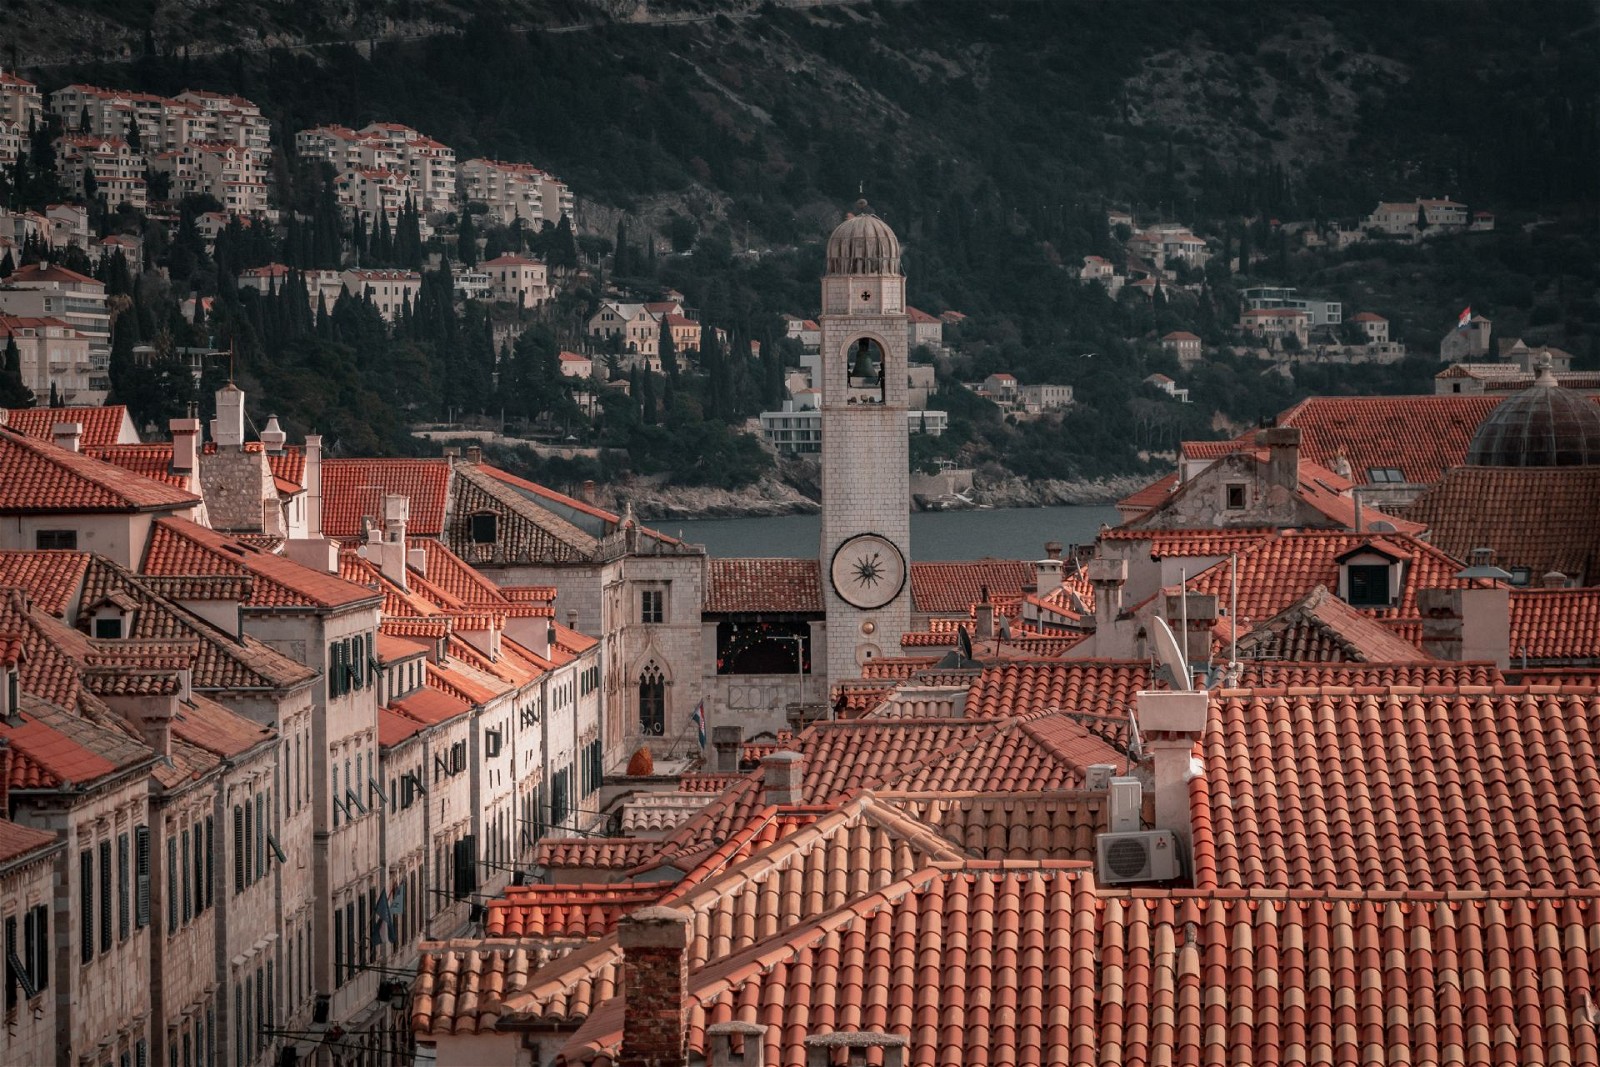 Top Attractions and Landmarks in Dubrovnik